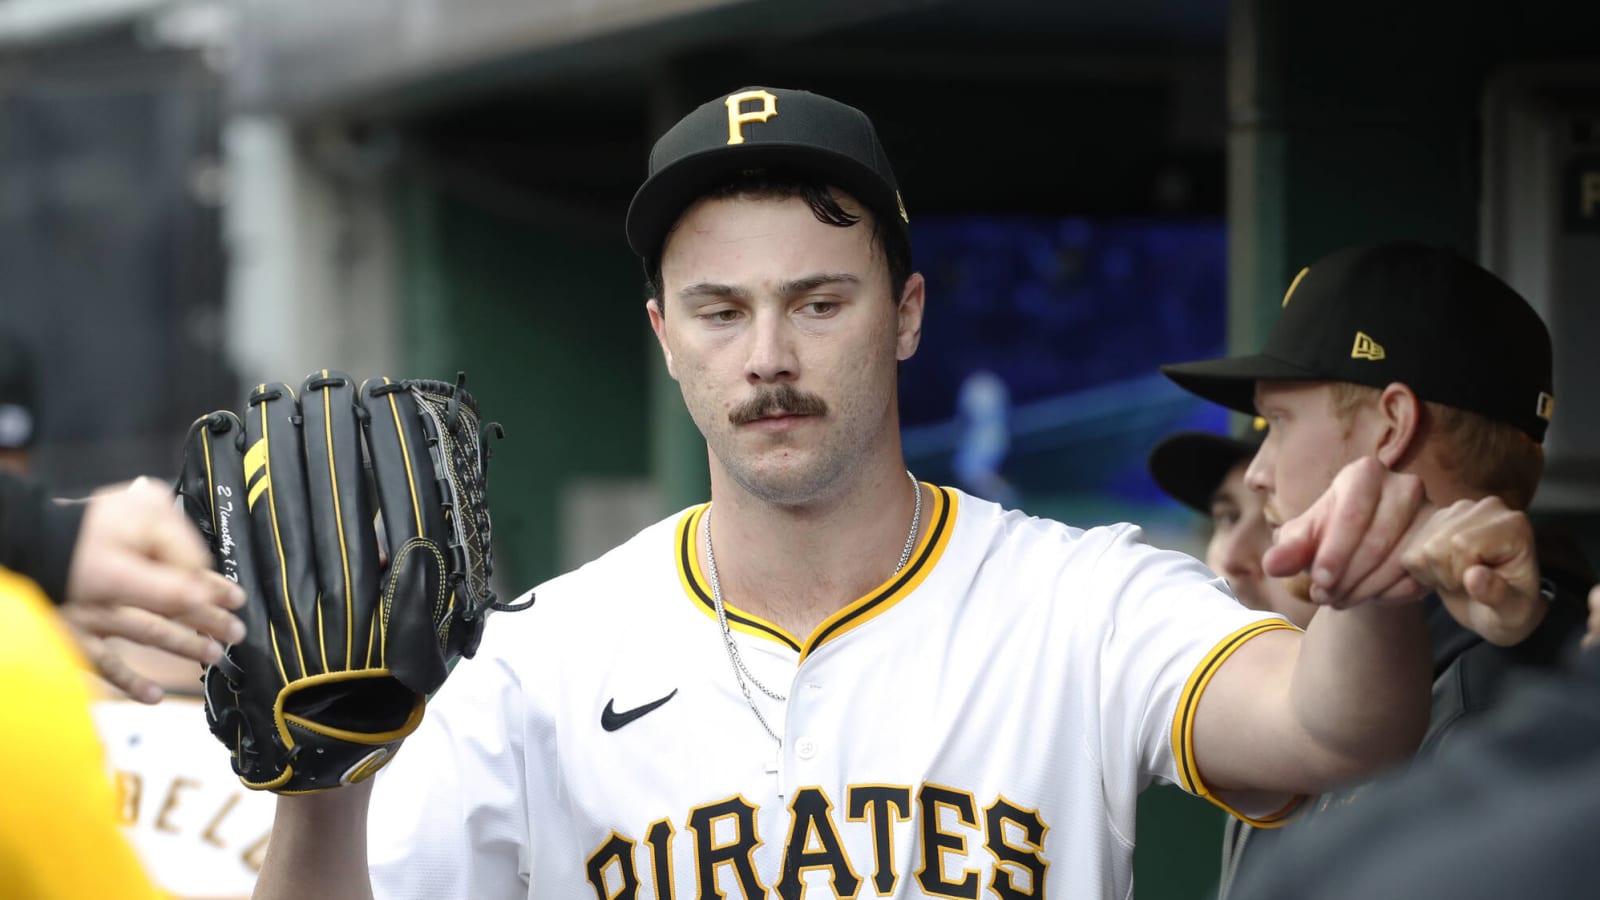 Pirates Top 10 Prospects Update: Skenes Debuts, Johnson’s Struggles Continue